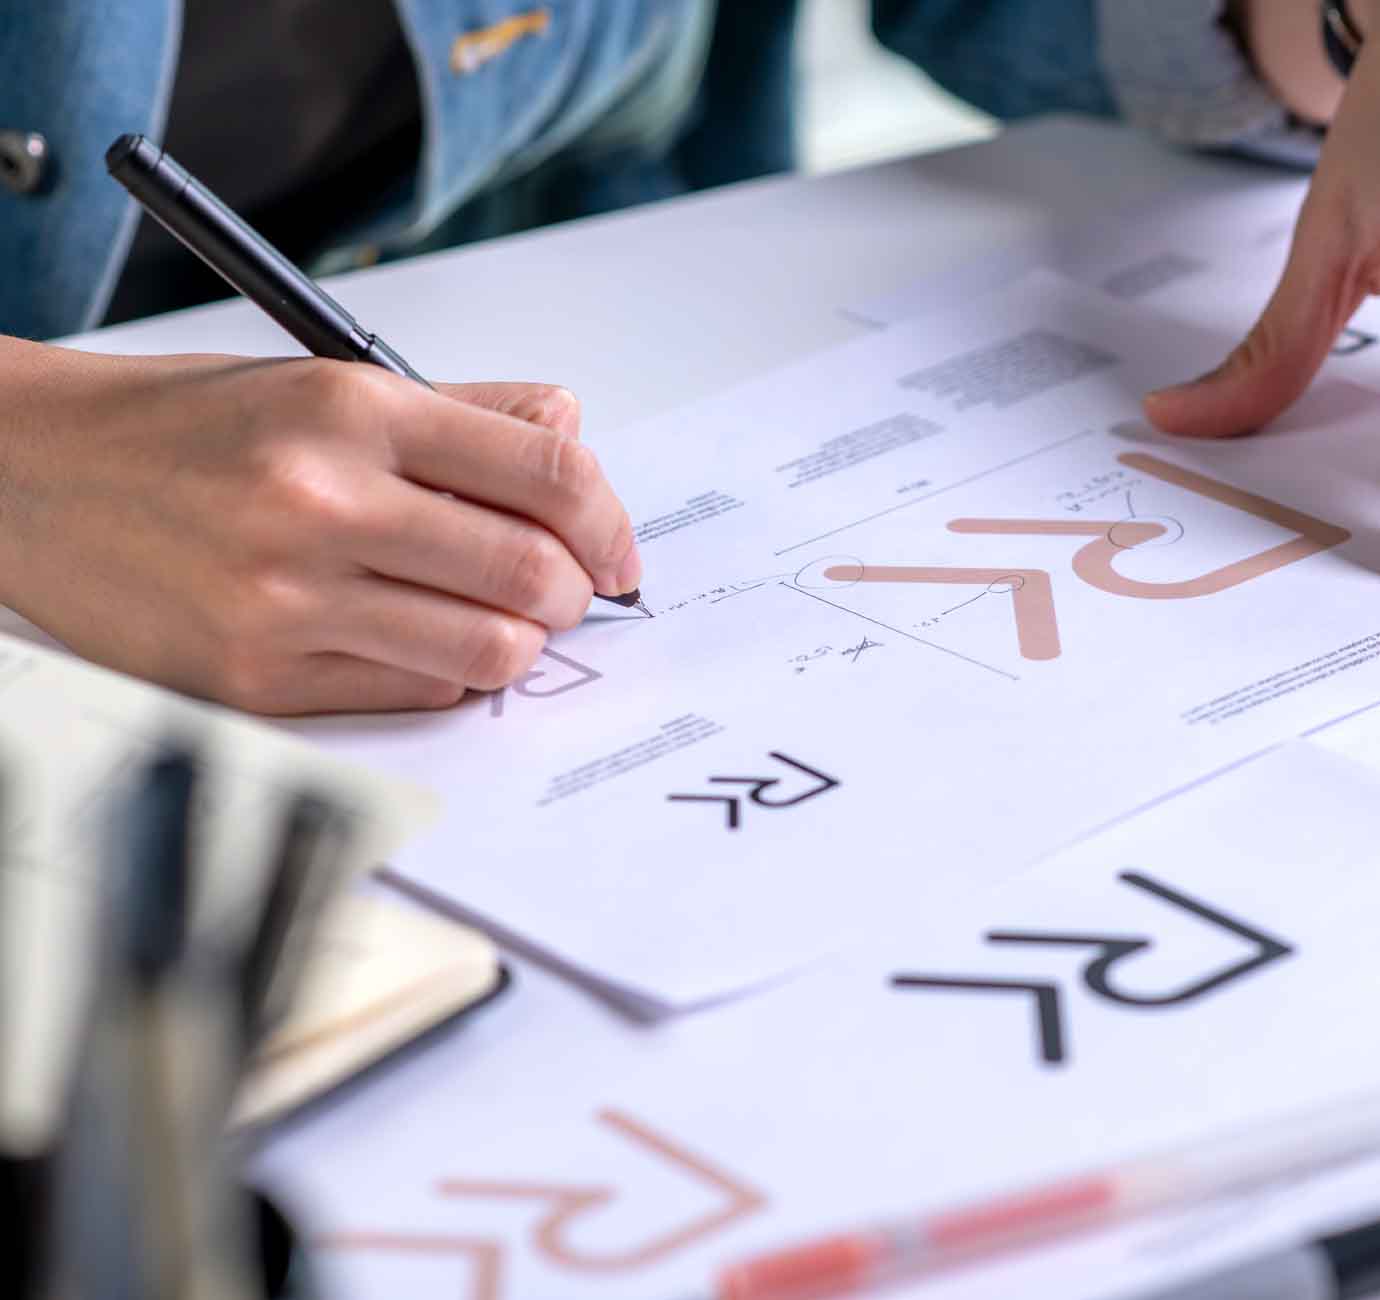 A designer at Crux Design Agency creating a brand identity as part of their logo design service offering